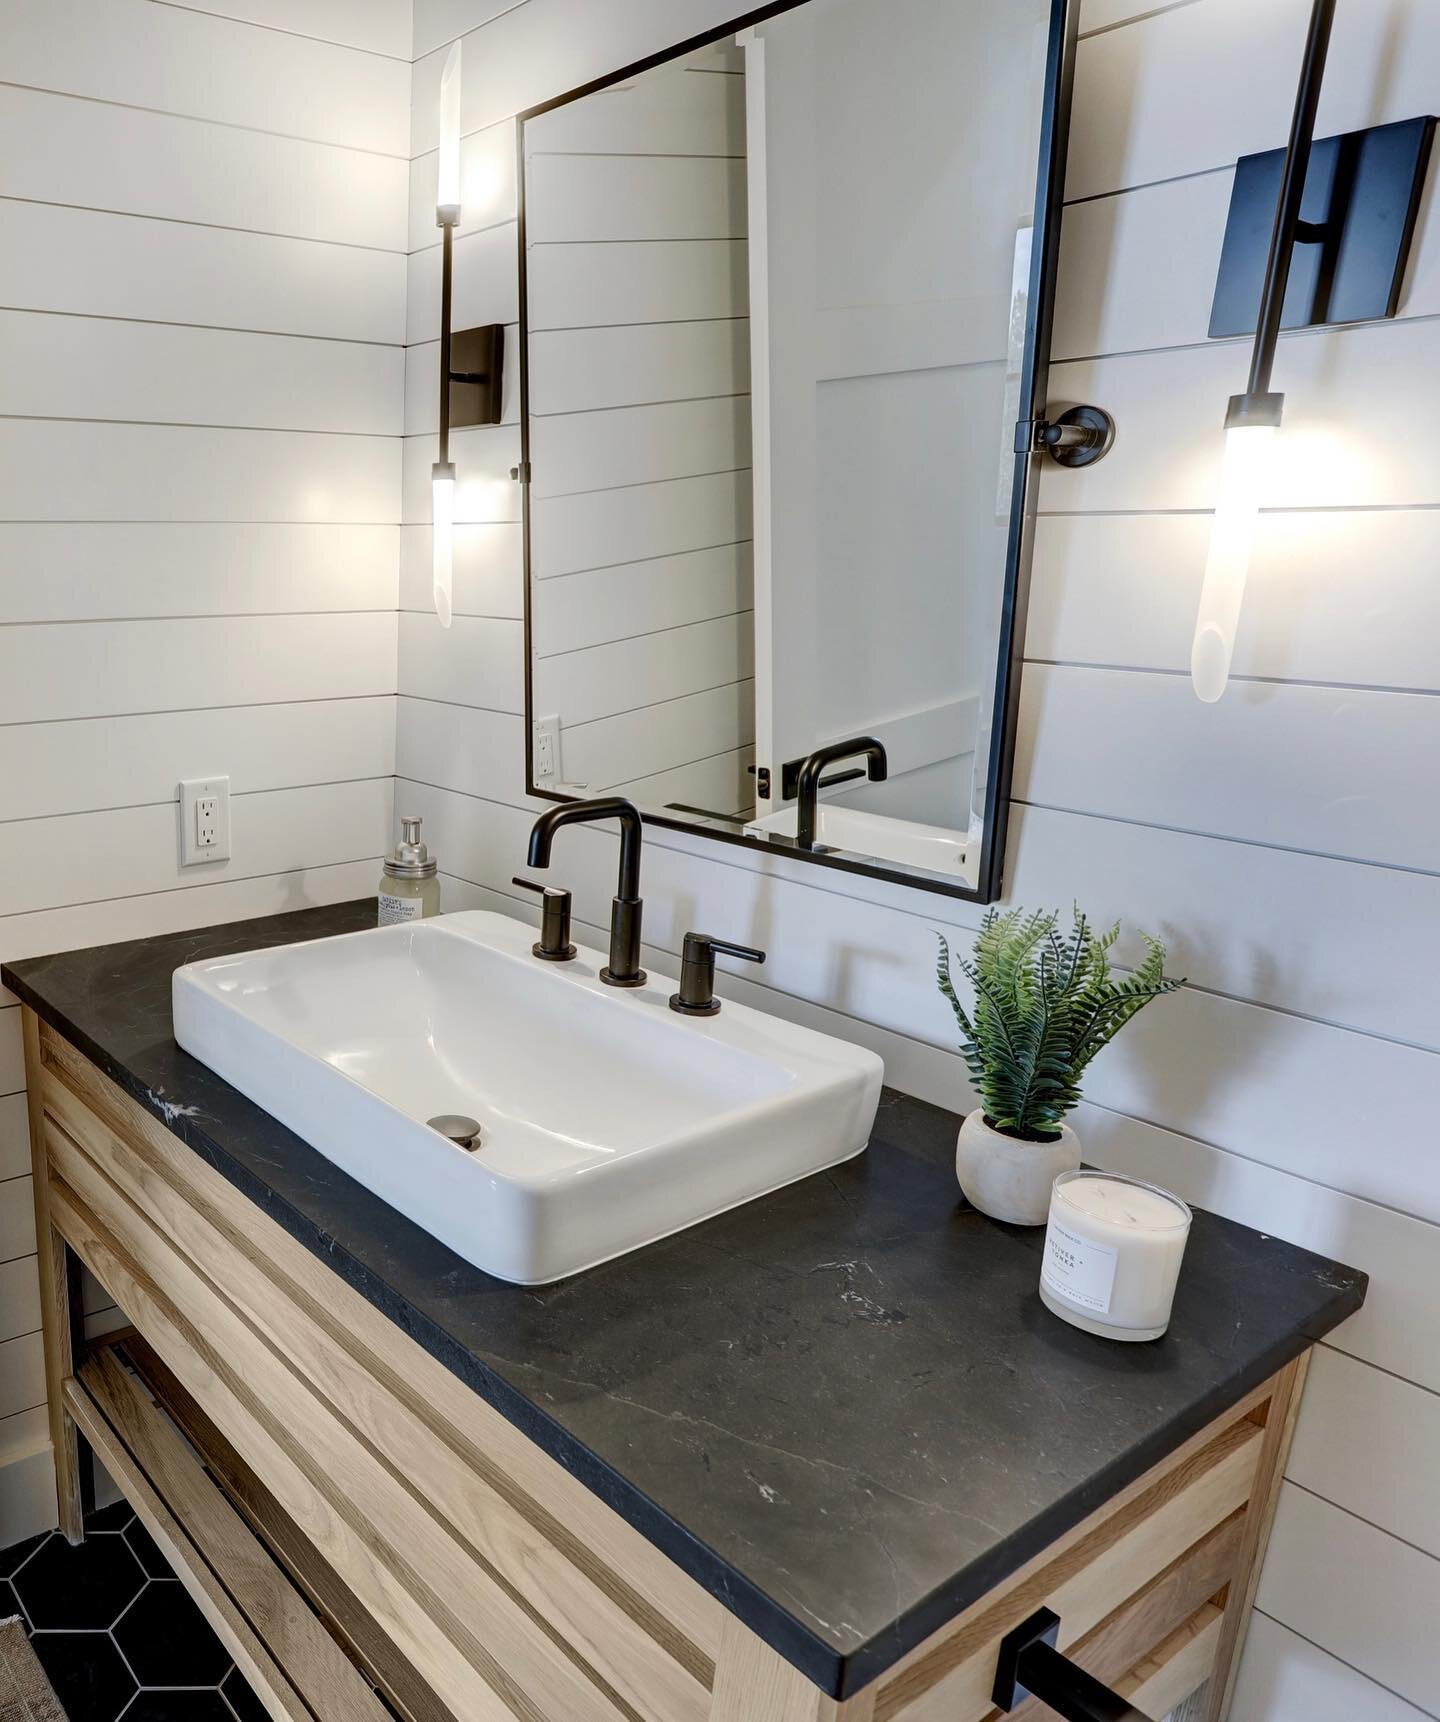 This beautiful powder bathroom doubles as the pool bath at our #clchangelbayhillcountrymodern home.  Our clients loved the powder bath we did in one of our recent projects so selected the same wall sconces, sink and a dark hexagon floor tile but swit